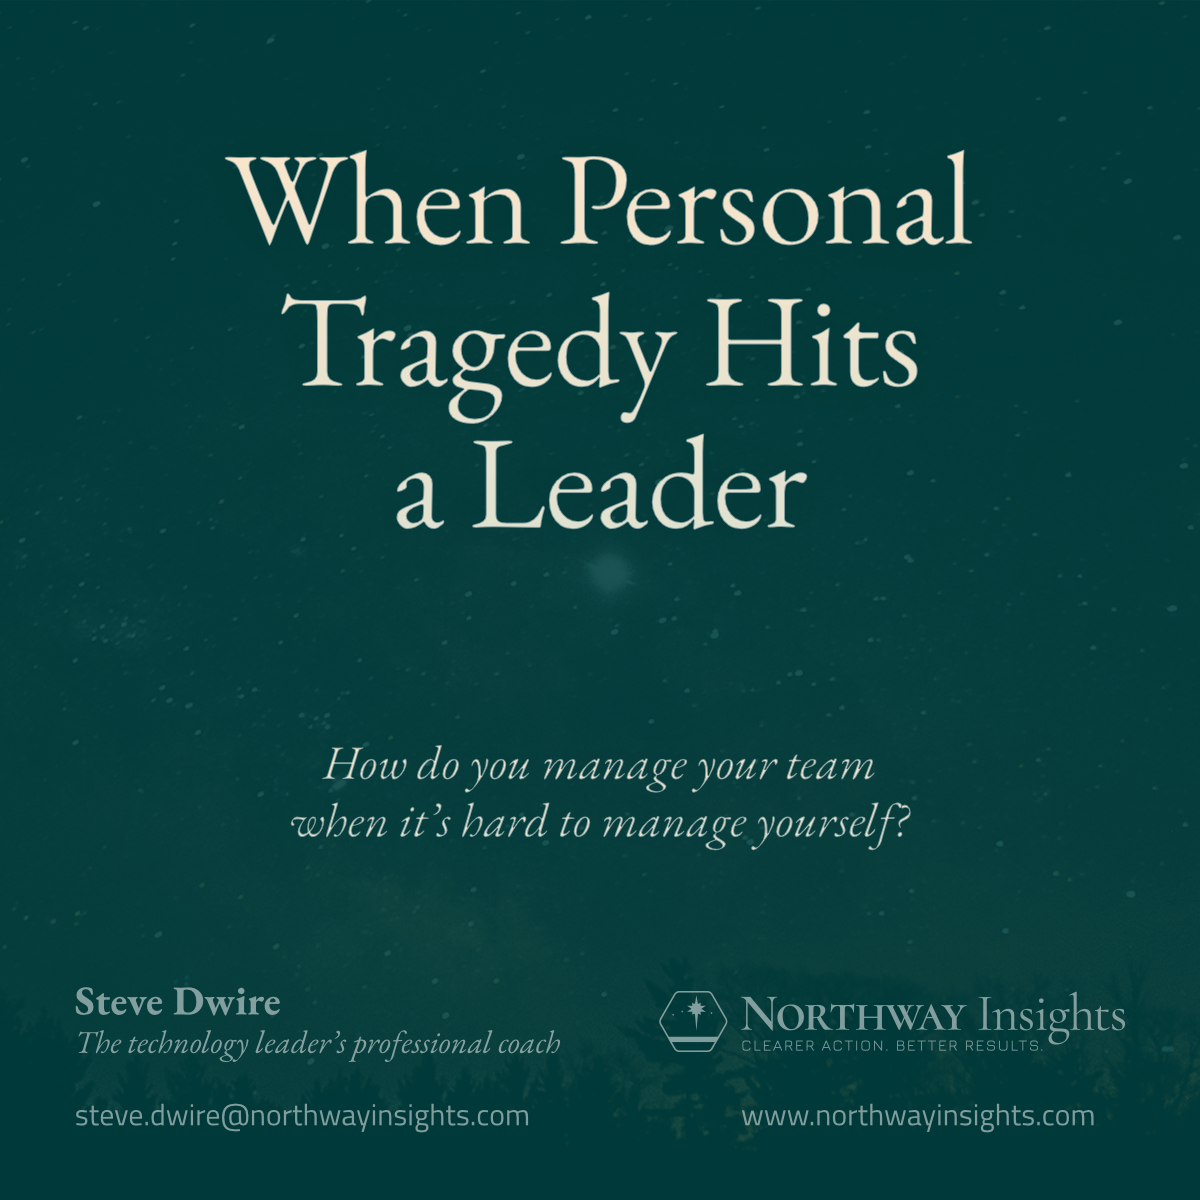 When Personal Tragedy Hits a Leader